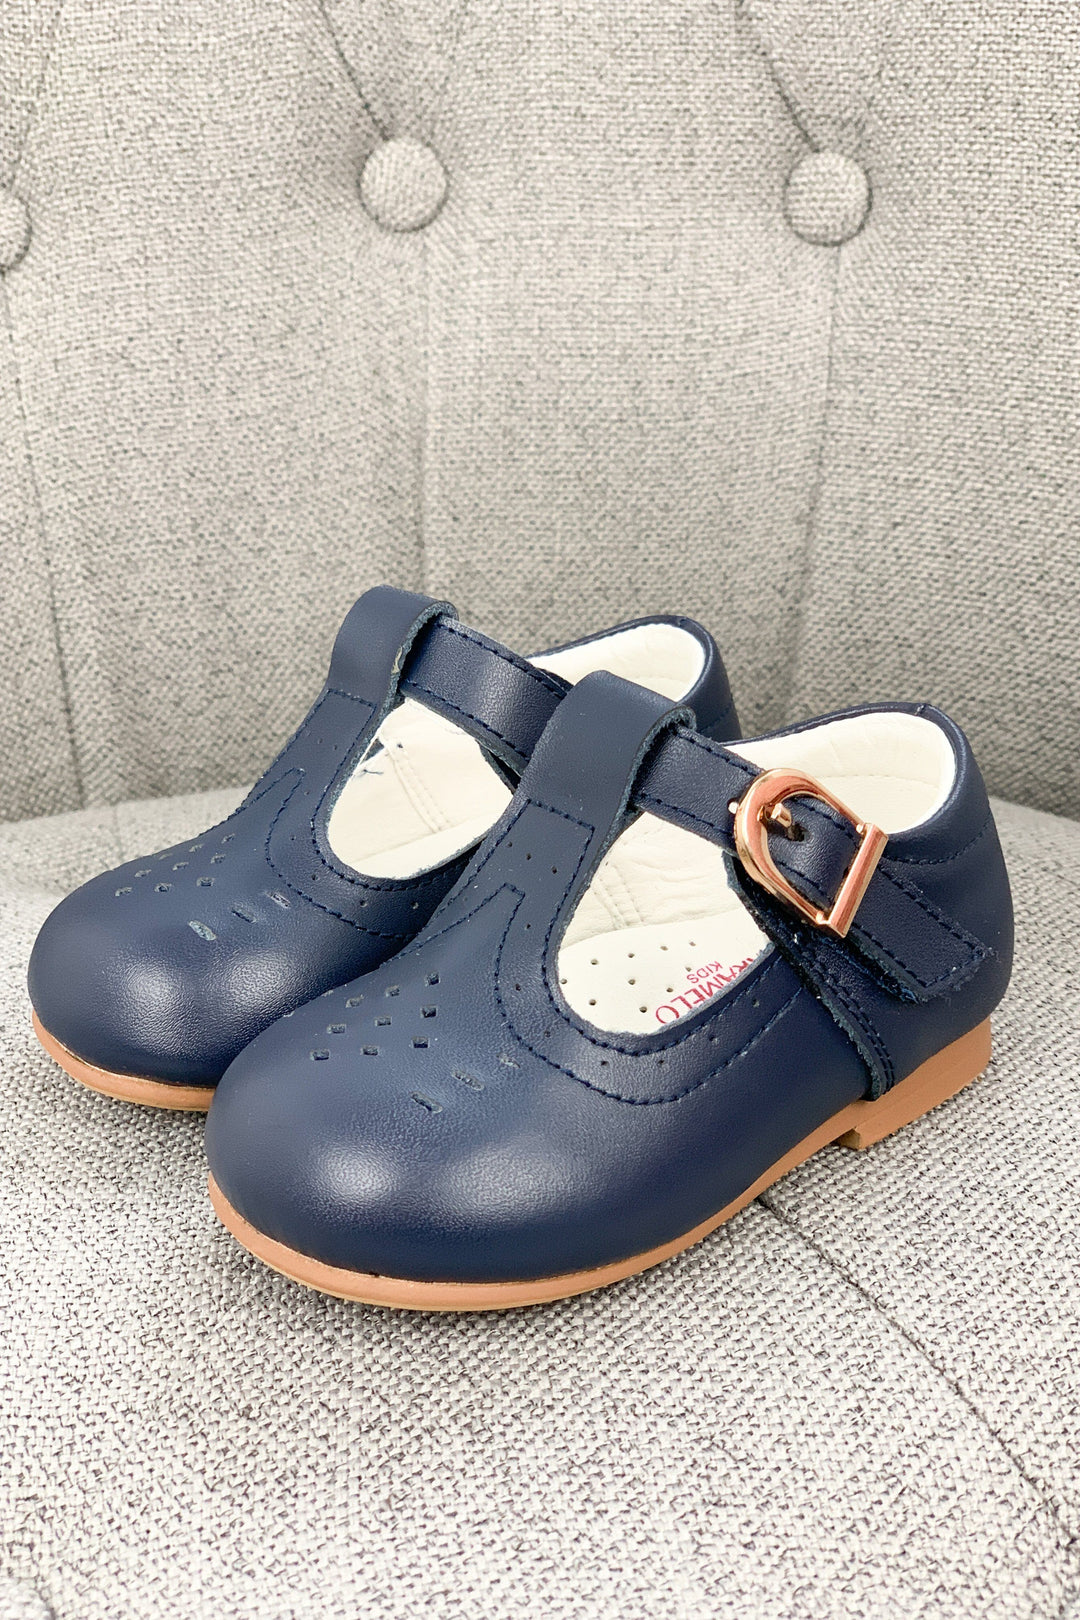 Caramelo Kids "Lucas" Leather T-Bar Shoes | iphoneandroidapplications